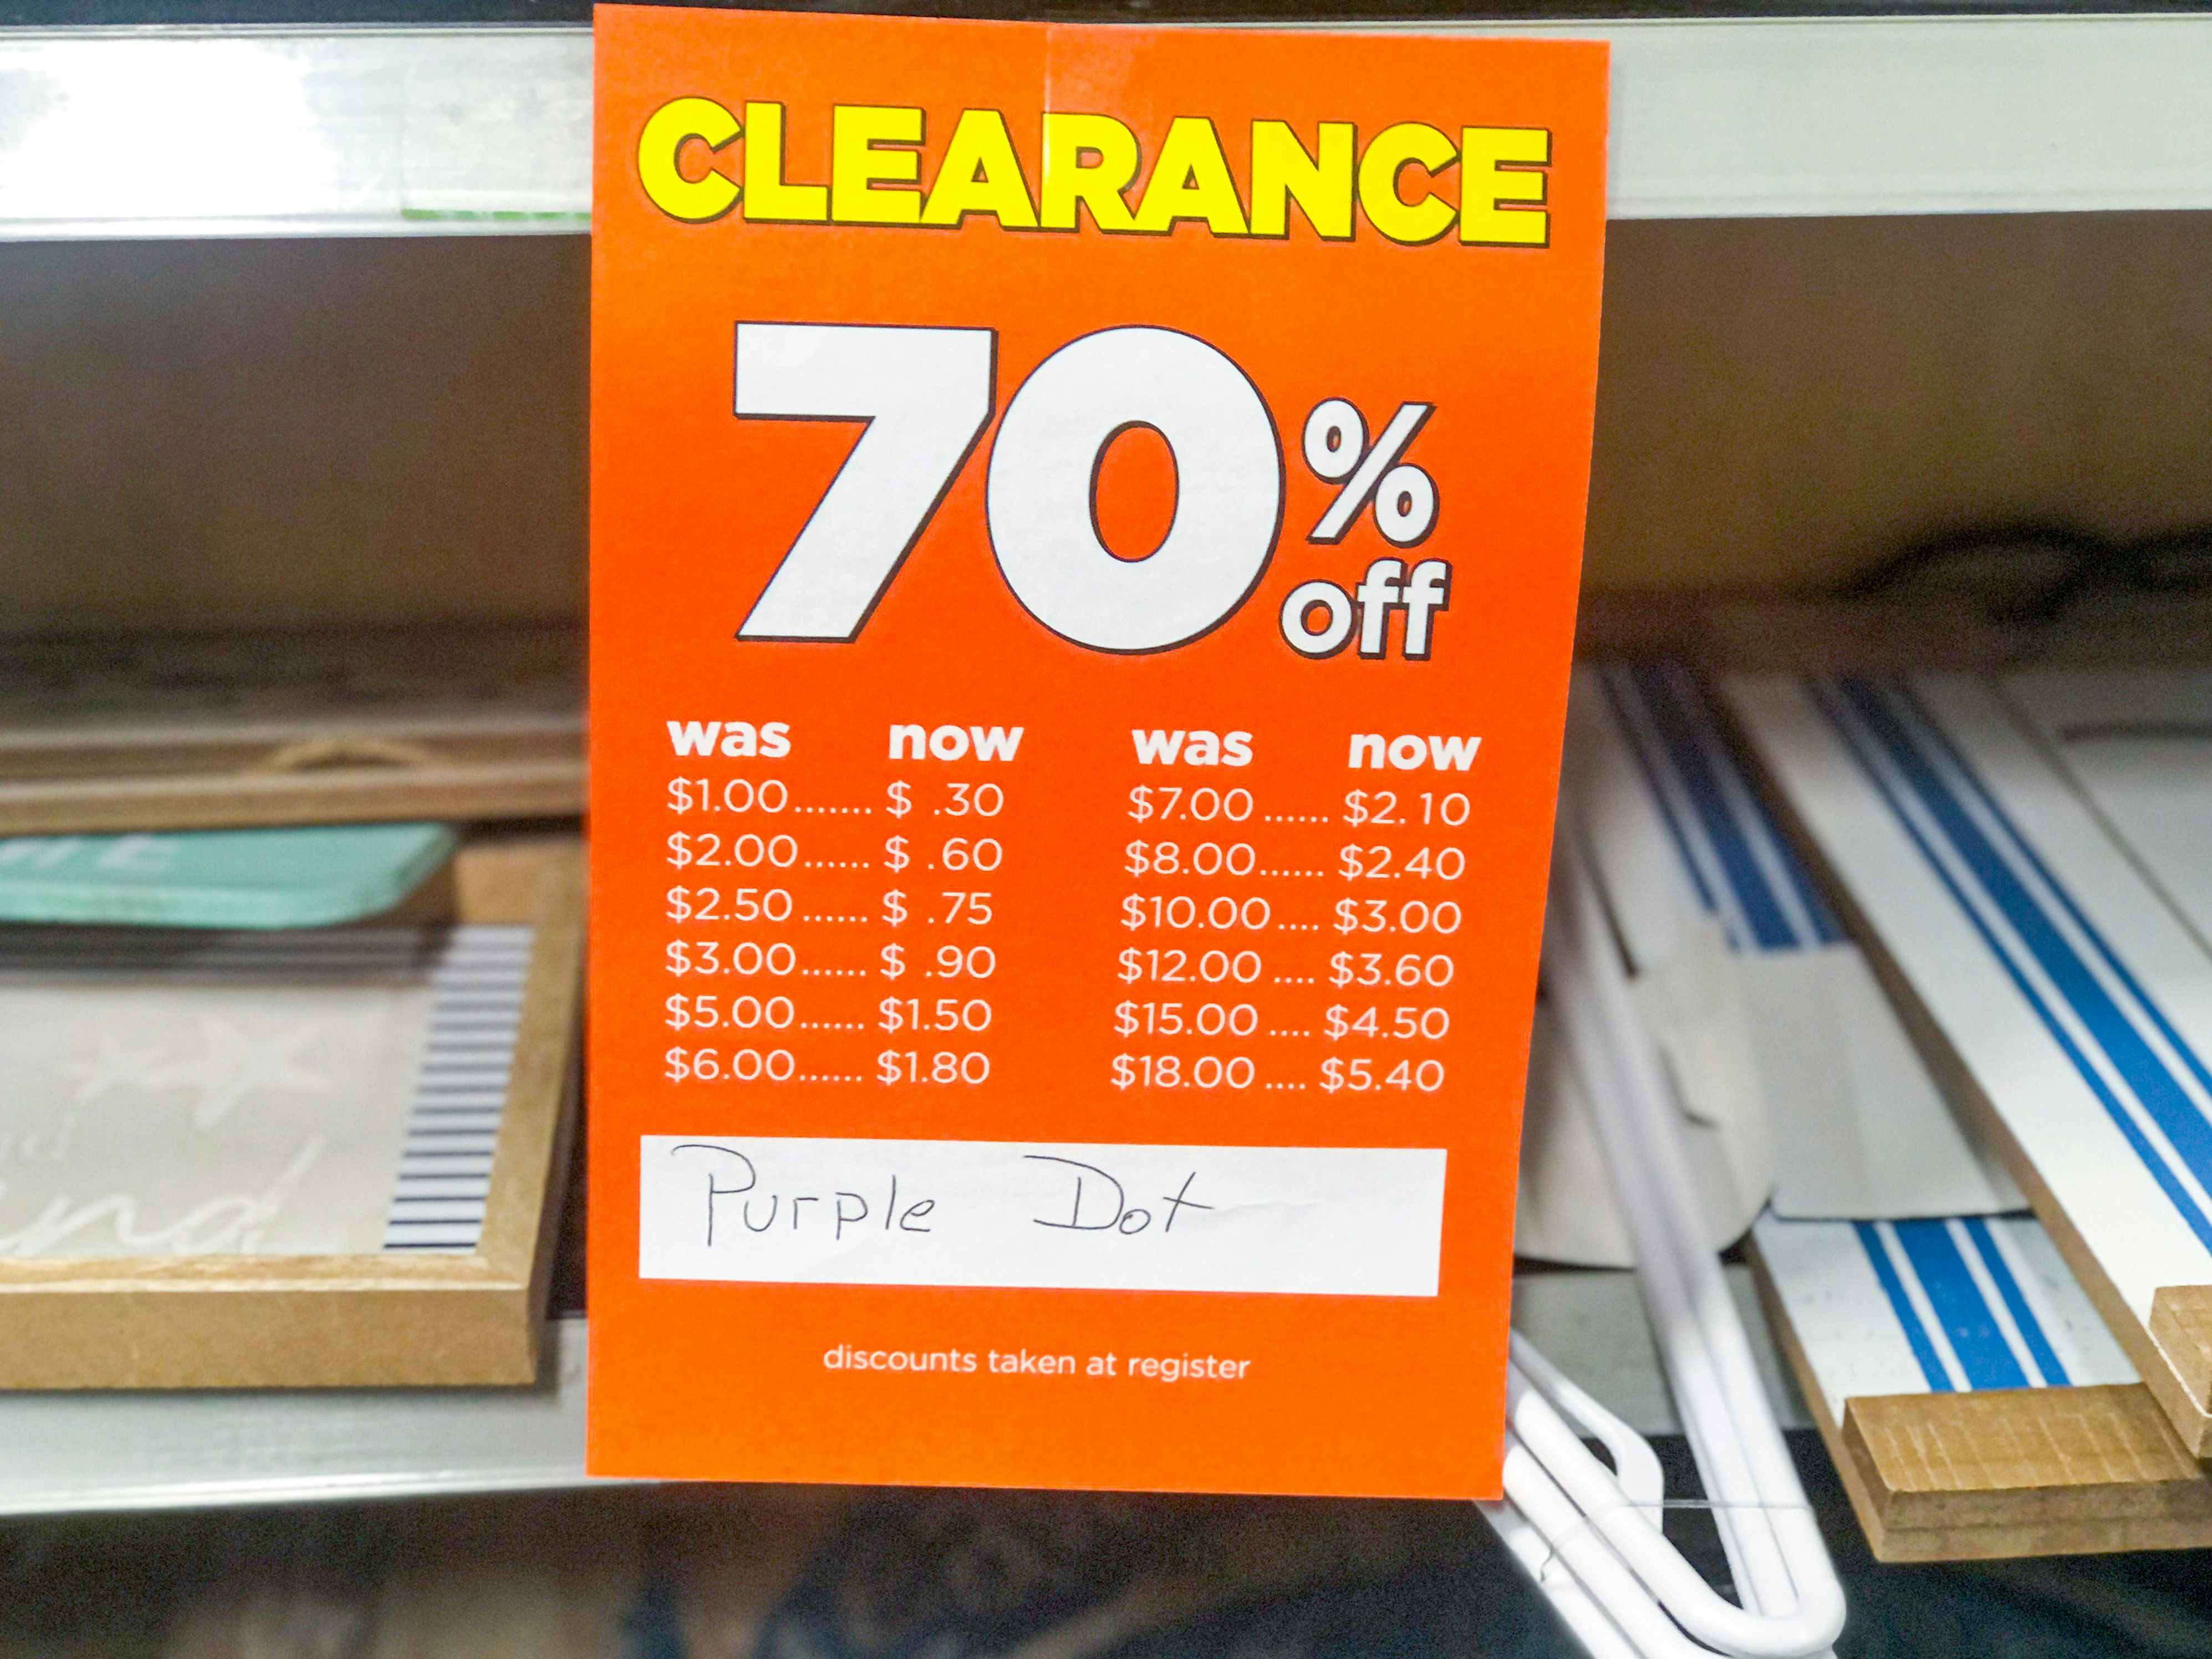 Warehouse Clearance Sale 2023! Up to 70% OFF!, Going on Mar. 10-11 & 17-18